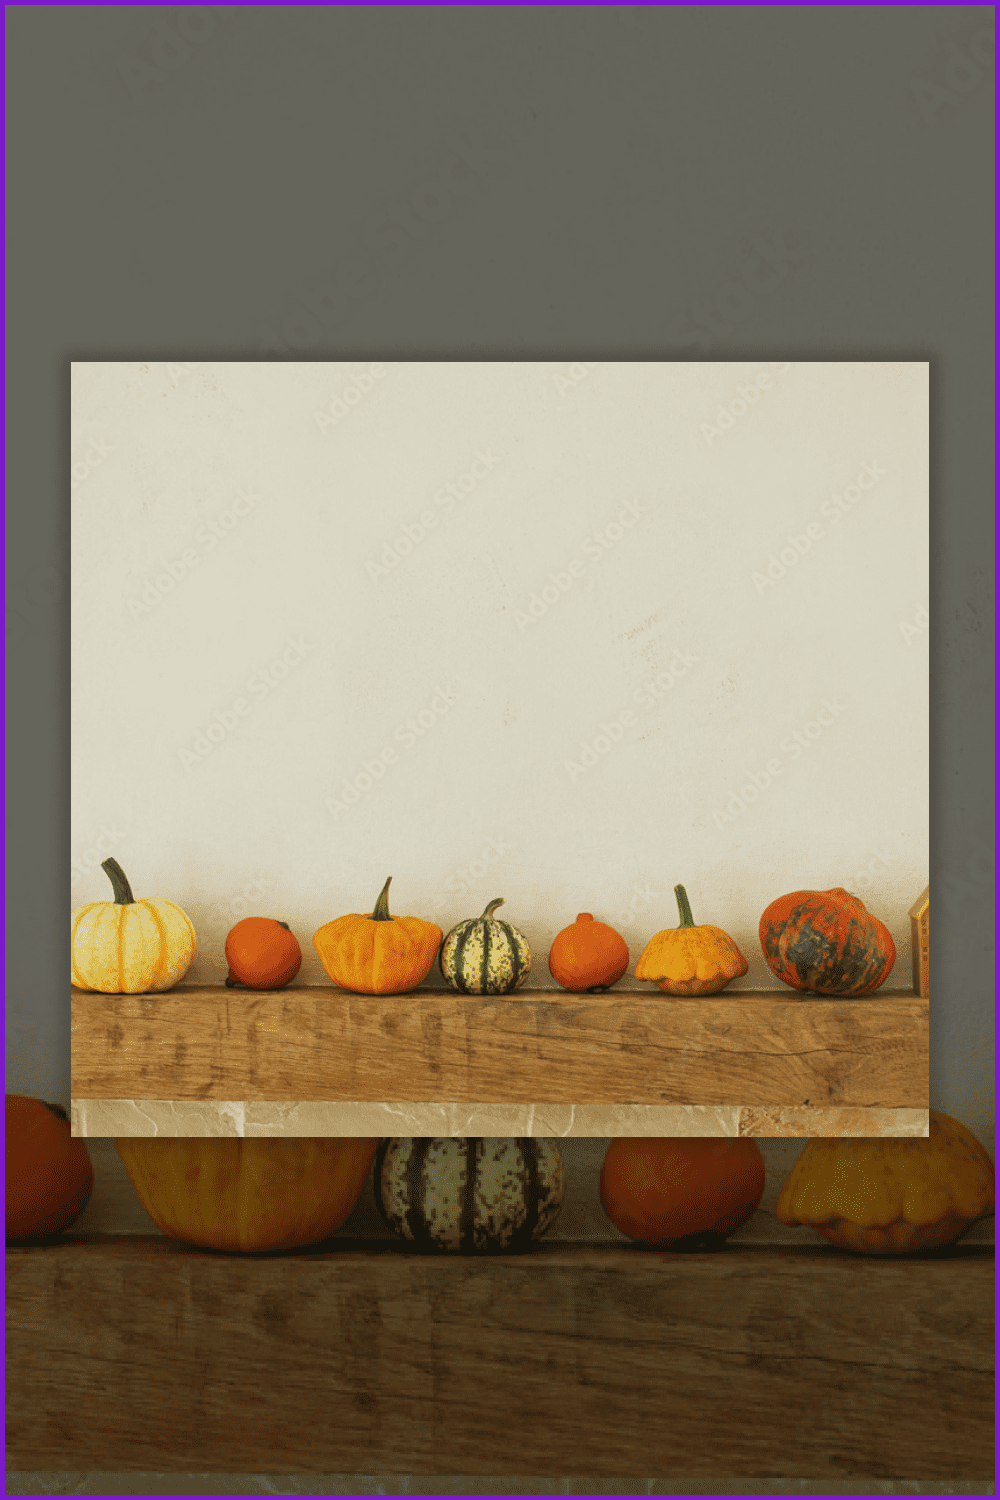 An image of the pumpkins and candles on rustic wood.